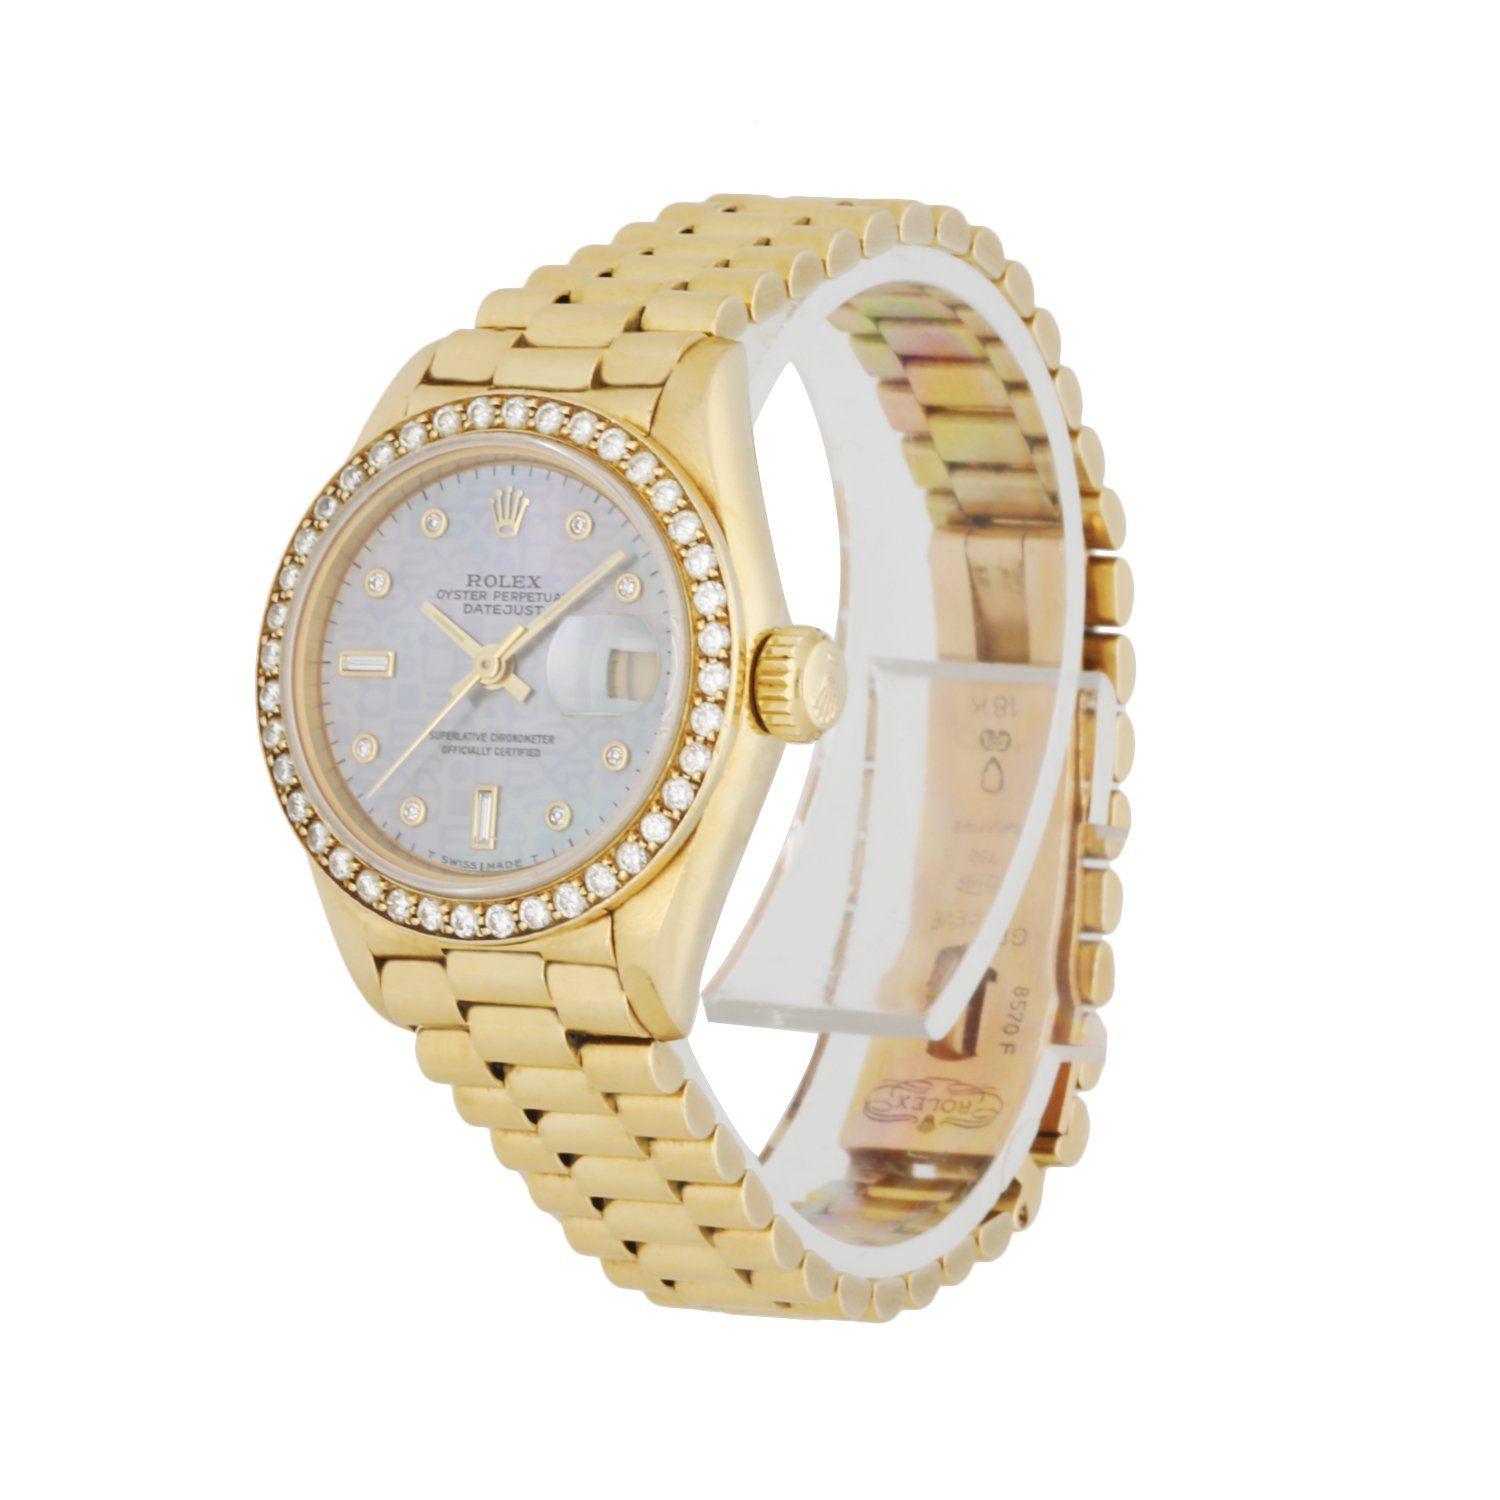 Rolex Datejust Diamond Dial 69138 Ladies Watch. 26mm 18k Yellow Gold case with factory diamond set bezel. Diamond Dial with gold hands and diamond & index hour markers. Minute markers on the outer dial. Date display at the 3 o'clock position. 18K